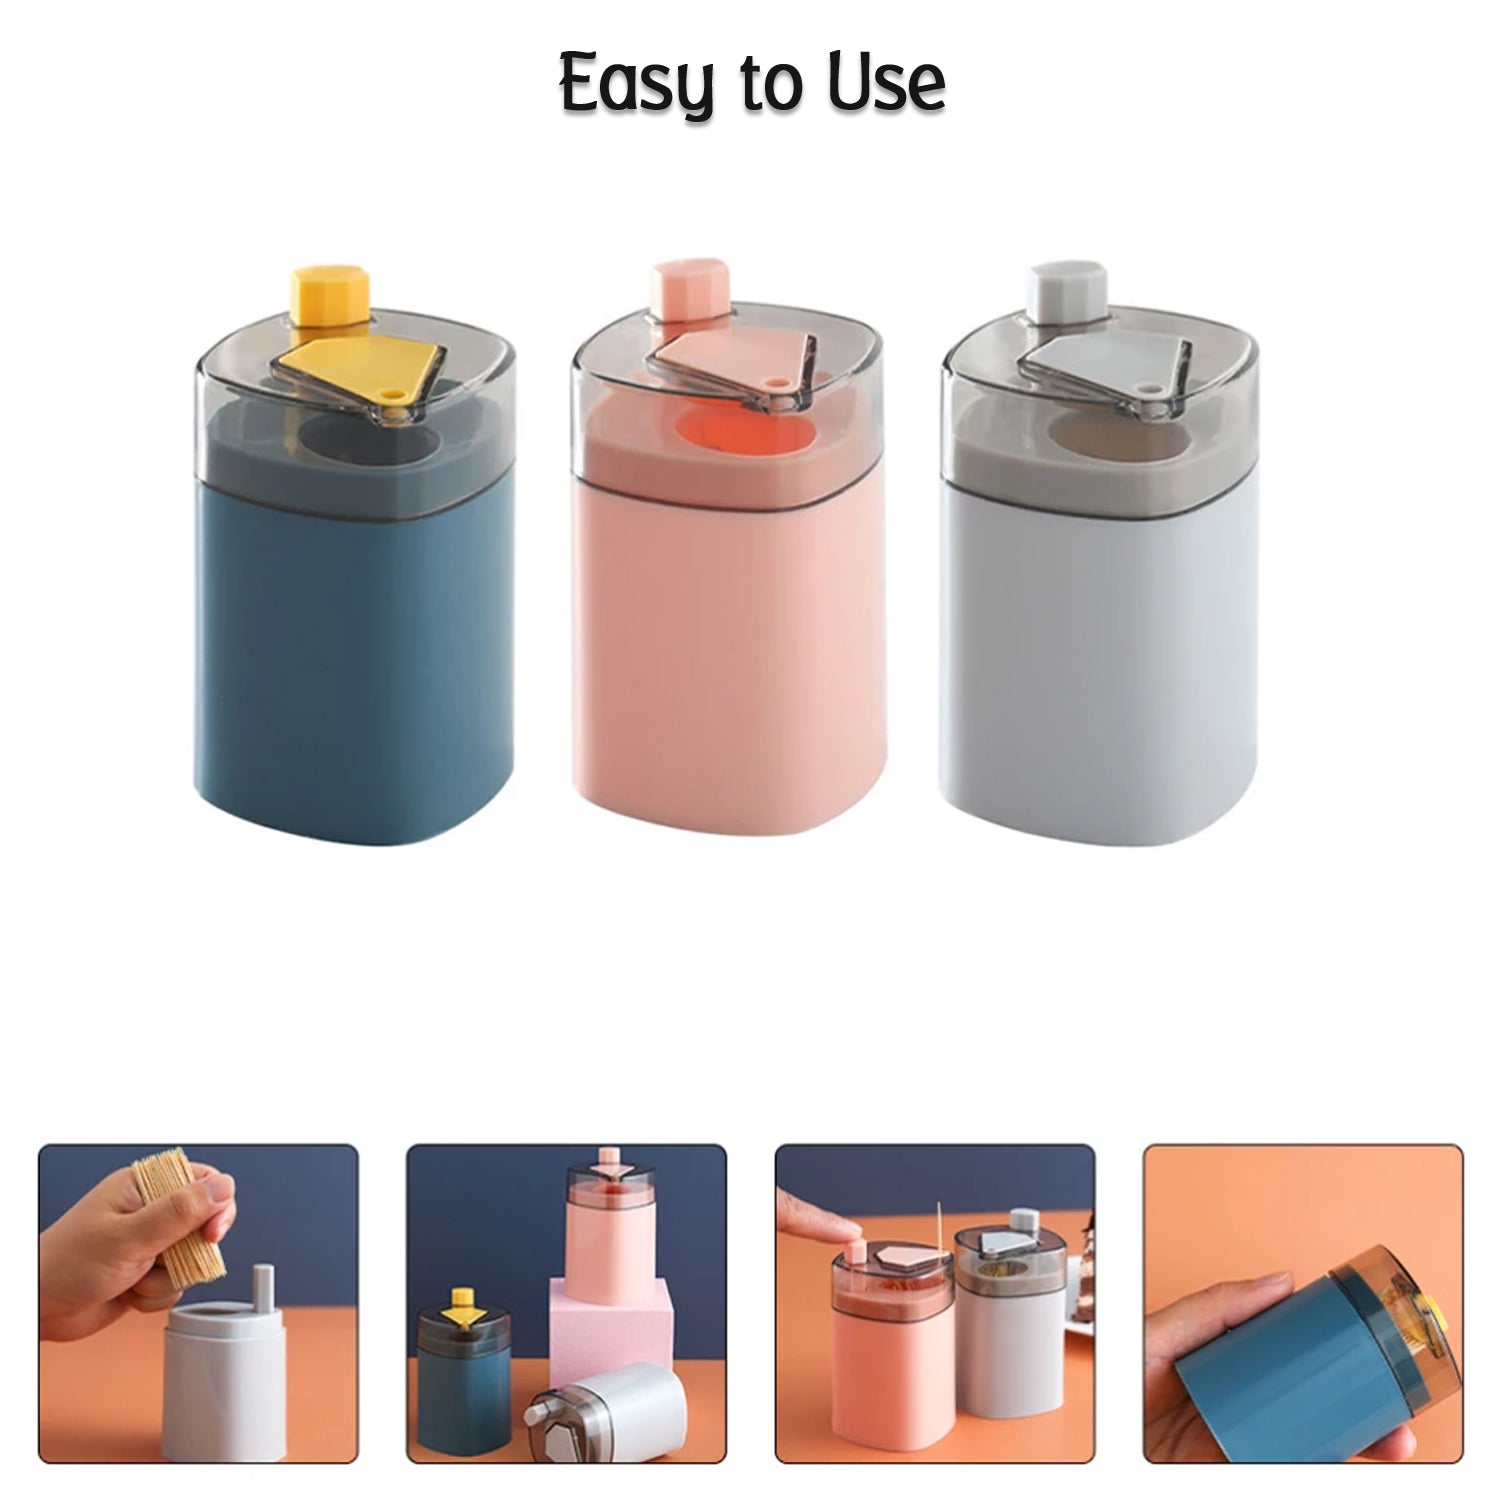 4005L Toothpick Holder Dispenser, Pop-Up Automatic Toothpick Dispenser for Kitchen Restaurant Thickening Toothpicks Container Pocket Novelty, Safe Container Toothpick Storage Box. DeoDap